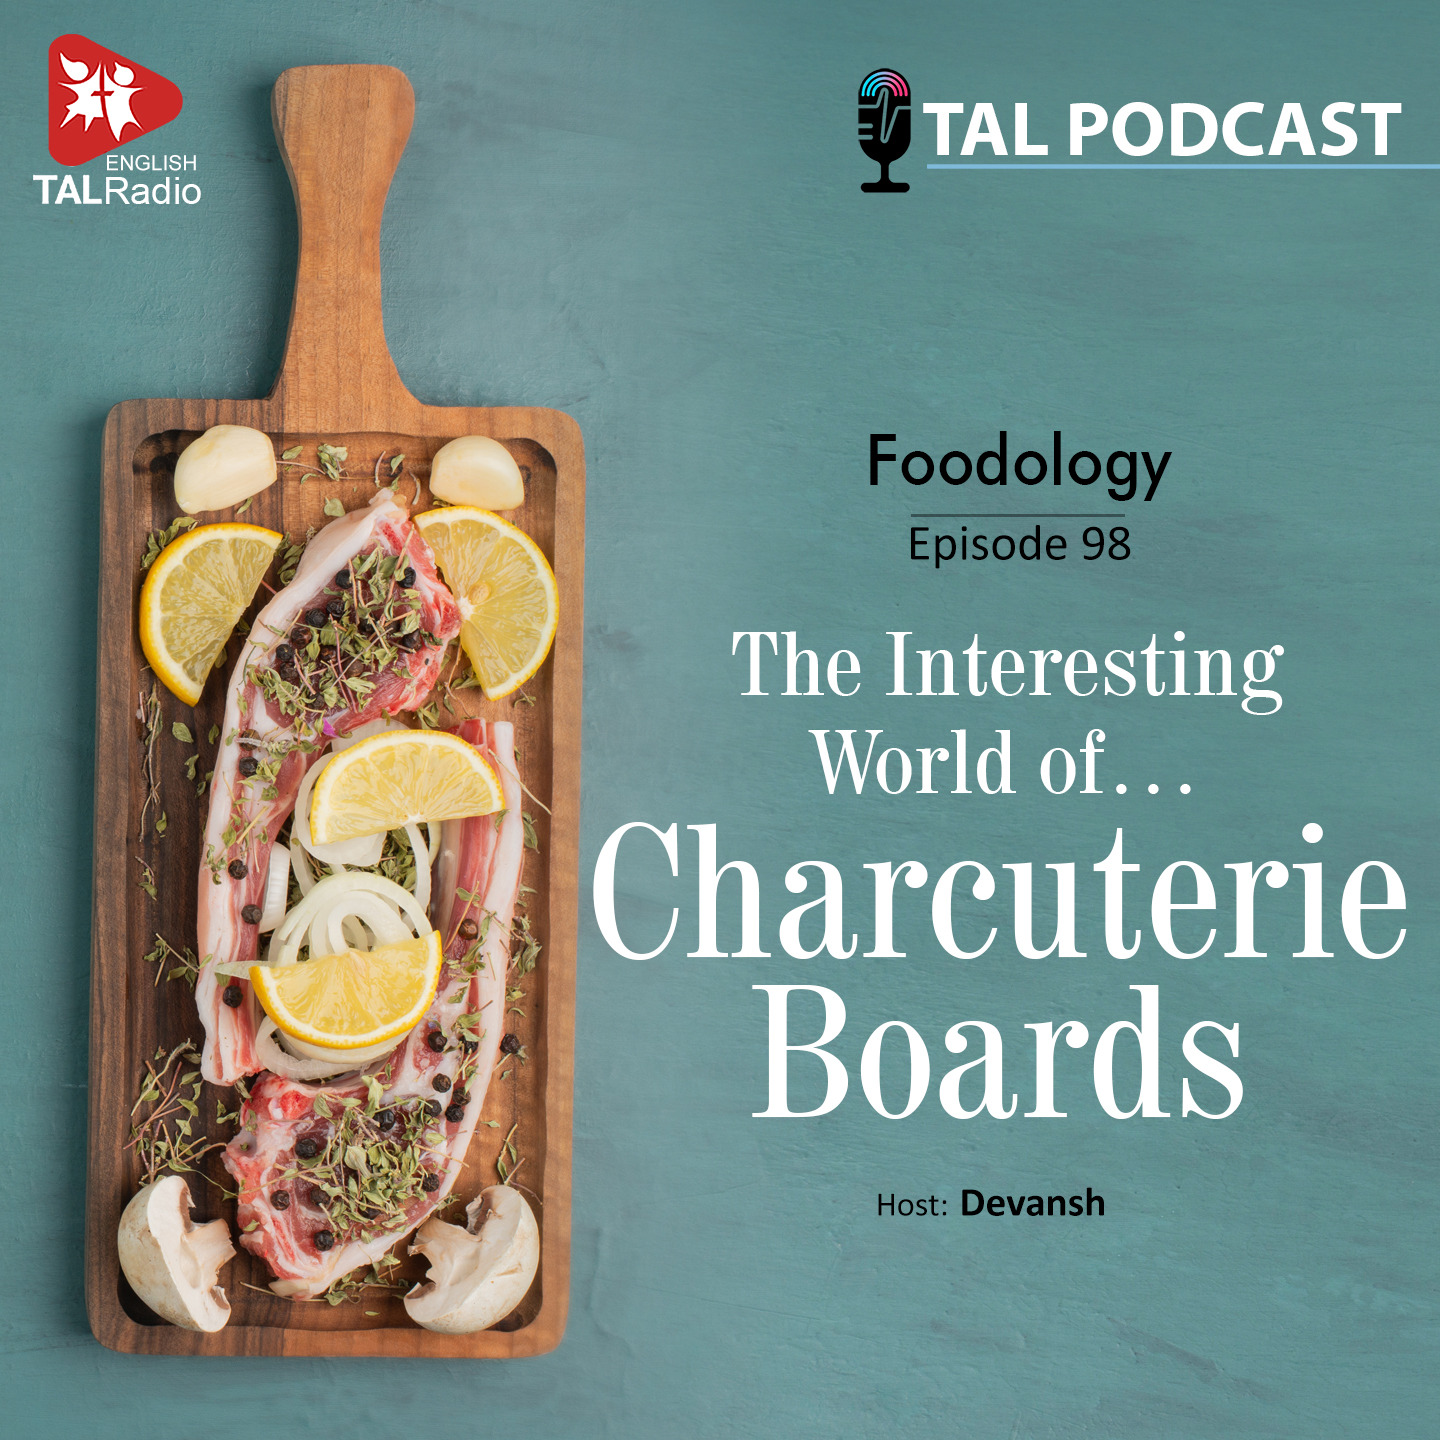 The Interesting World of CHARCUTERIE BOARDS